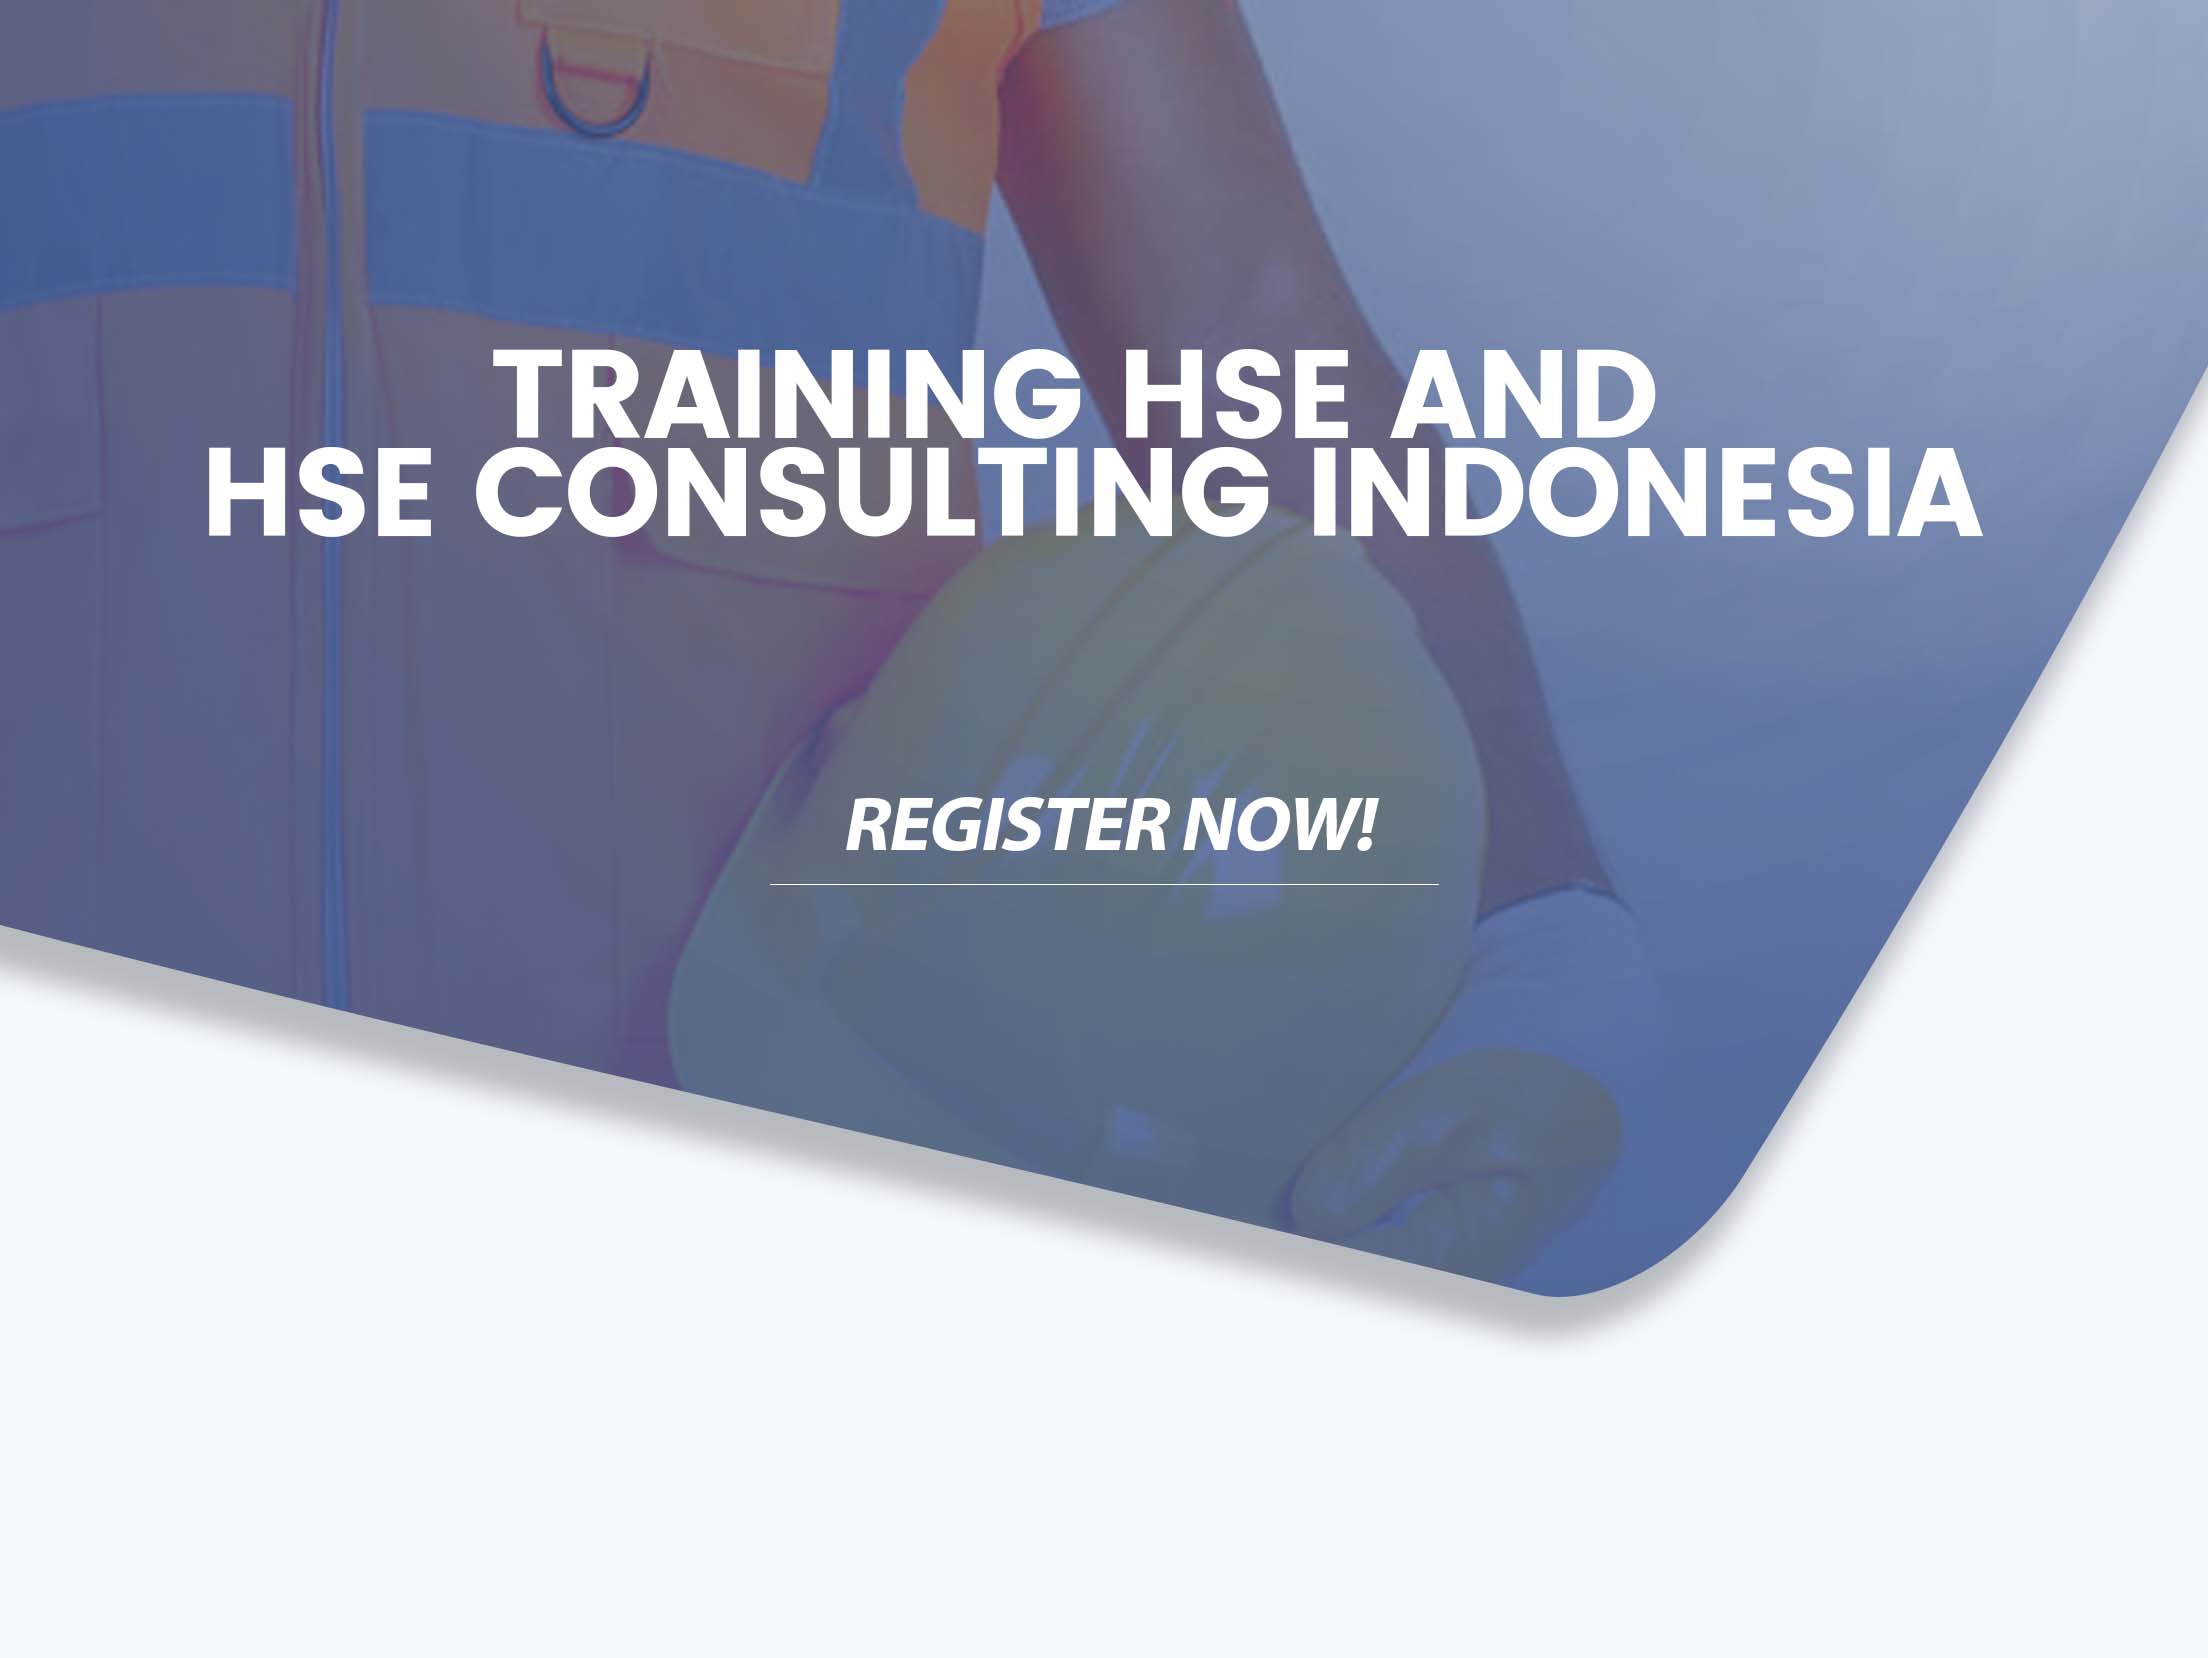 Training HSE and HSE Consulting Indonesia